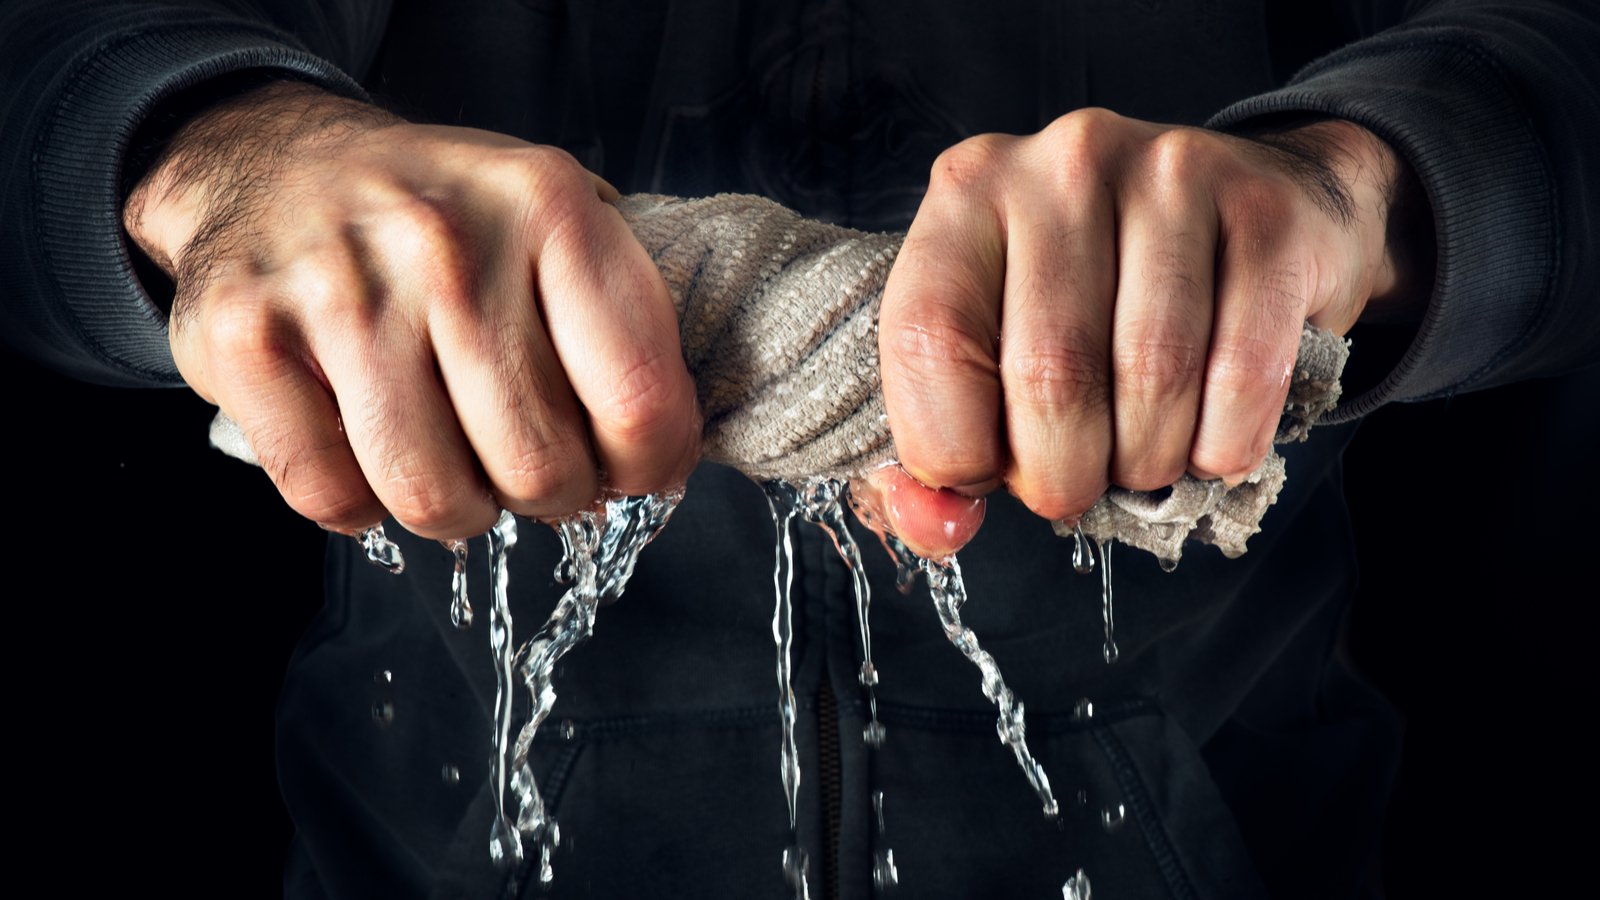 Man squeezing water out of a rag.